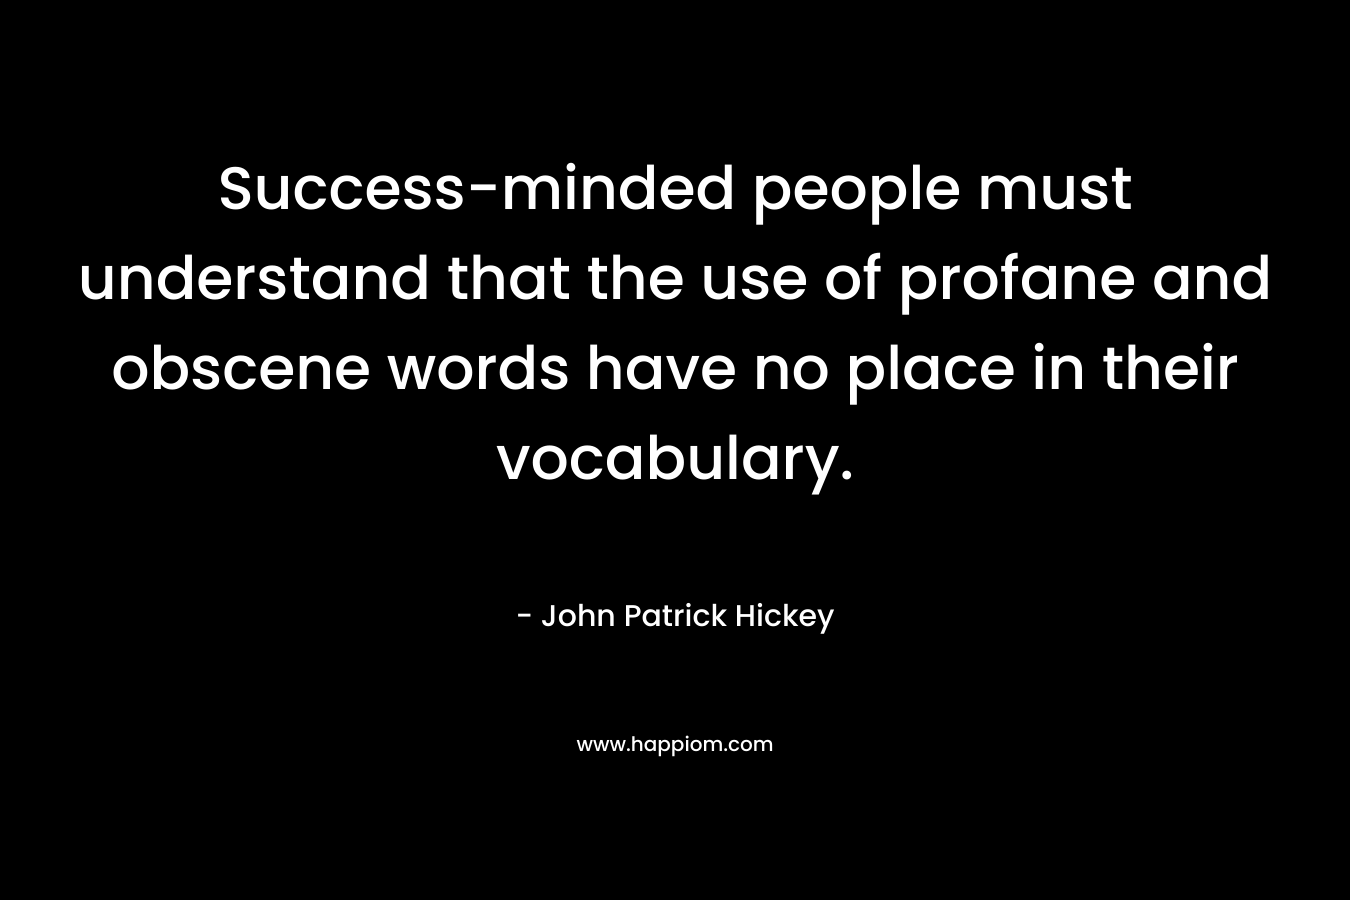 Success-minded people must understand that the use of profane and obscene words have no place in their vocabulary. – John Patrick Hickey